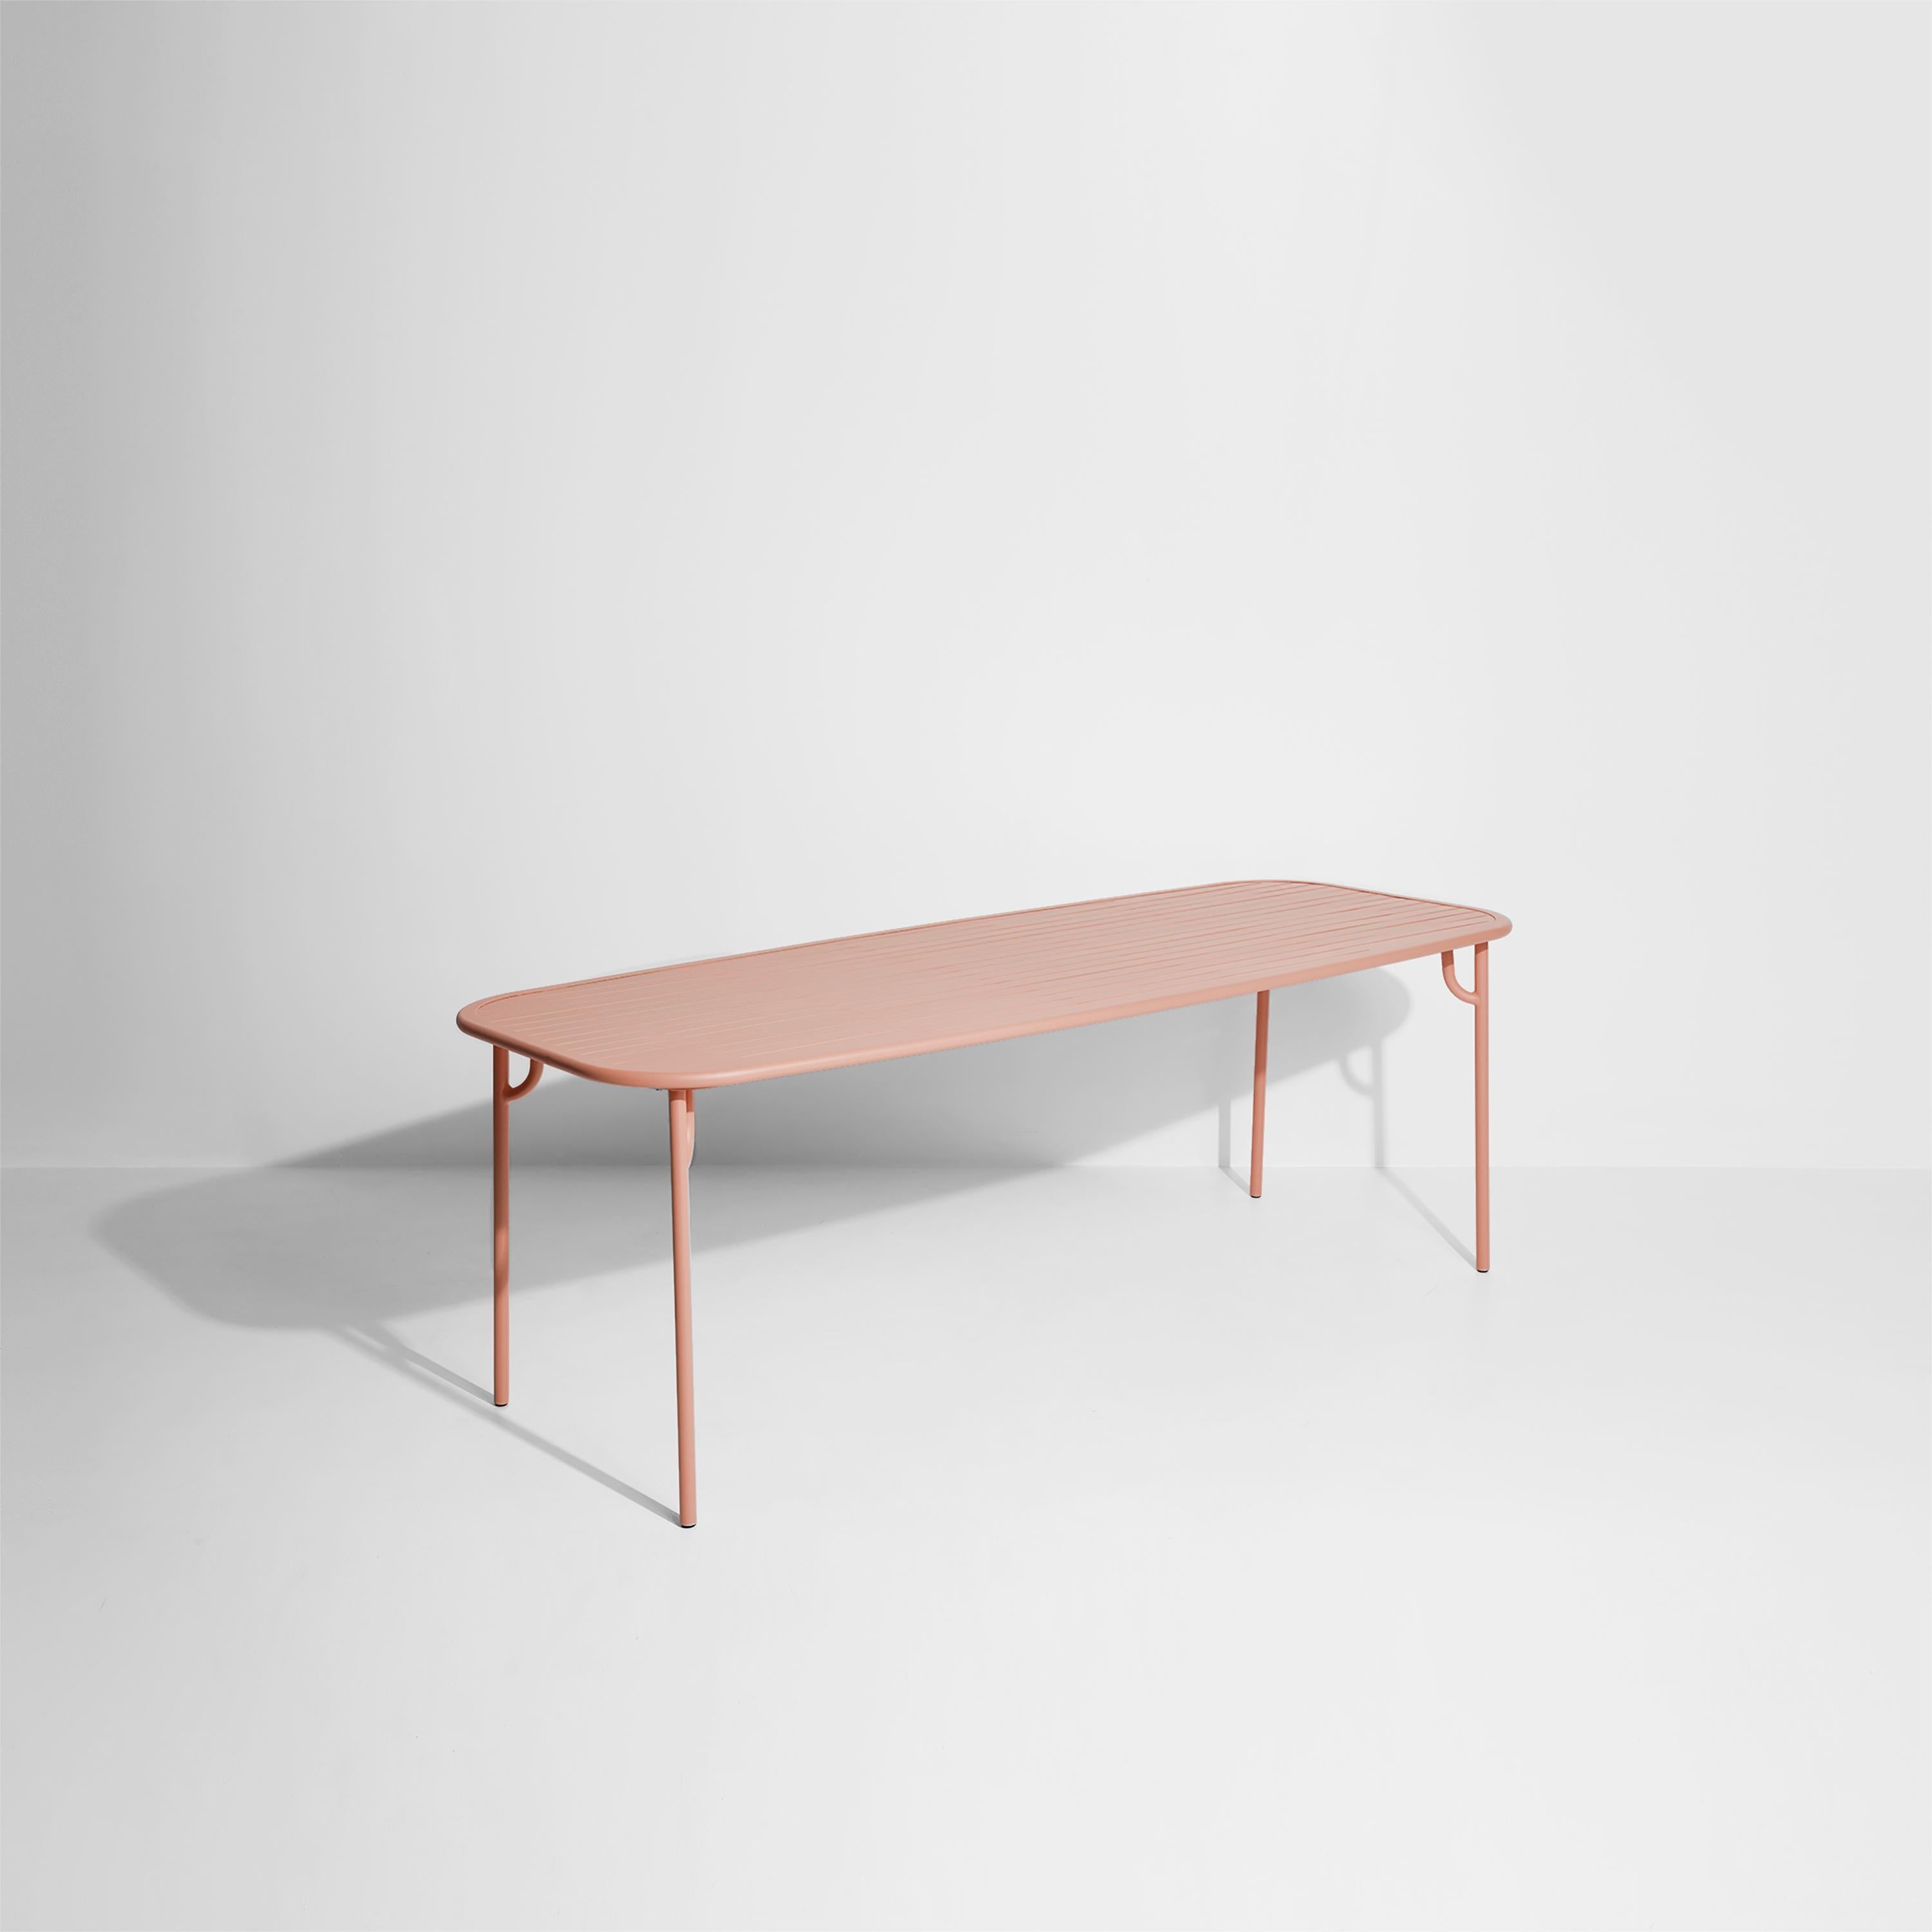 Petite Friture Week-End Large Rectangular Dining Table in Blush Aluminium with Slats by Studio BrichetZiegler, 2017

The week-end collection is a full range of outdoor furniture, in aluminium grained epoxy paint, matt finish, that includes 18